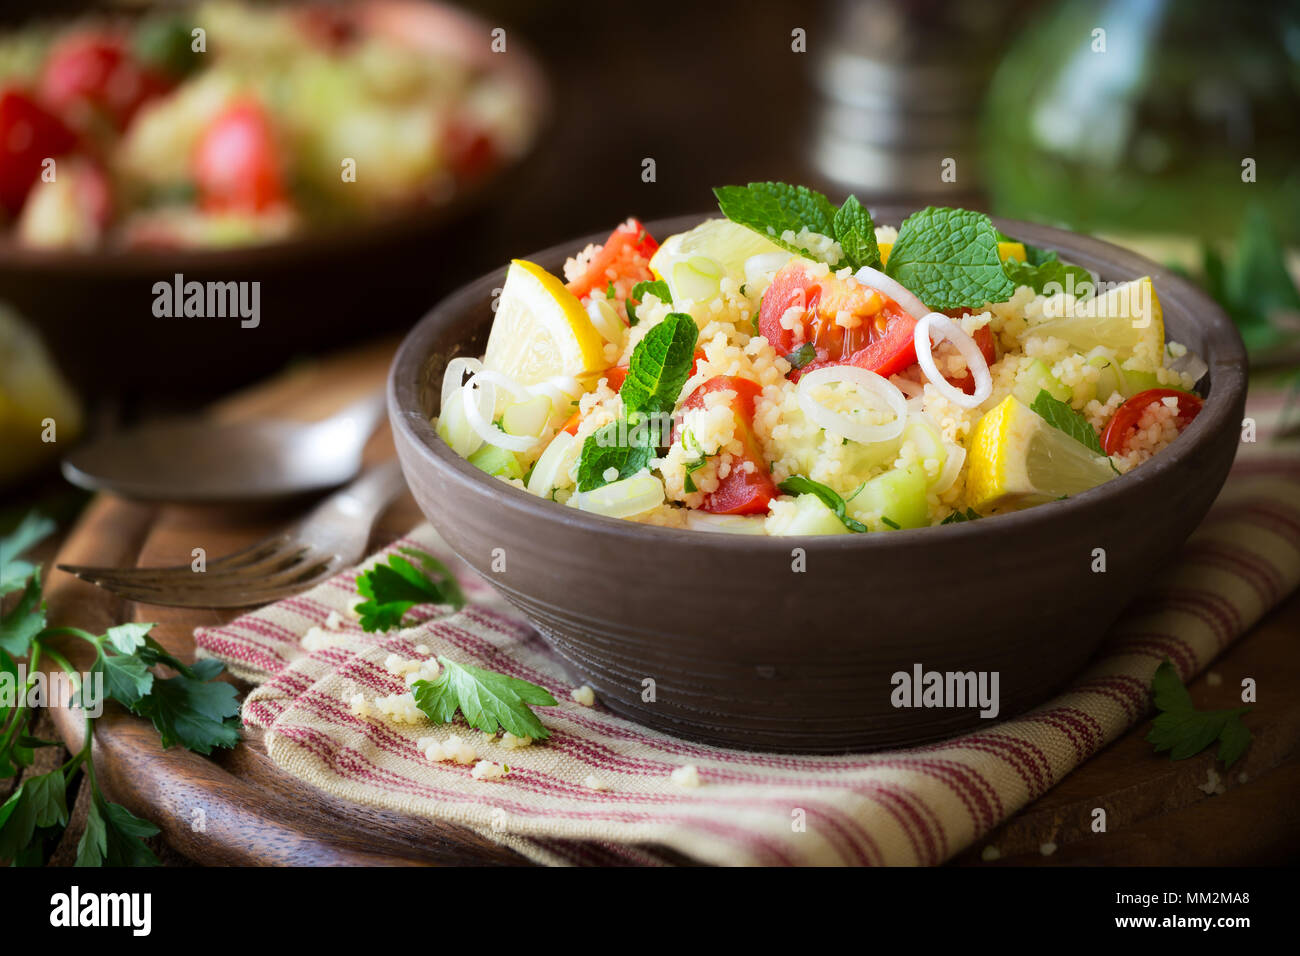 Vegetarian tabbouleh - delicious couscous salad with cherry tomatoes, cucumbers, fresh mint and parsley leaves. Stock Photo